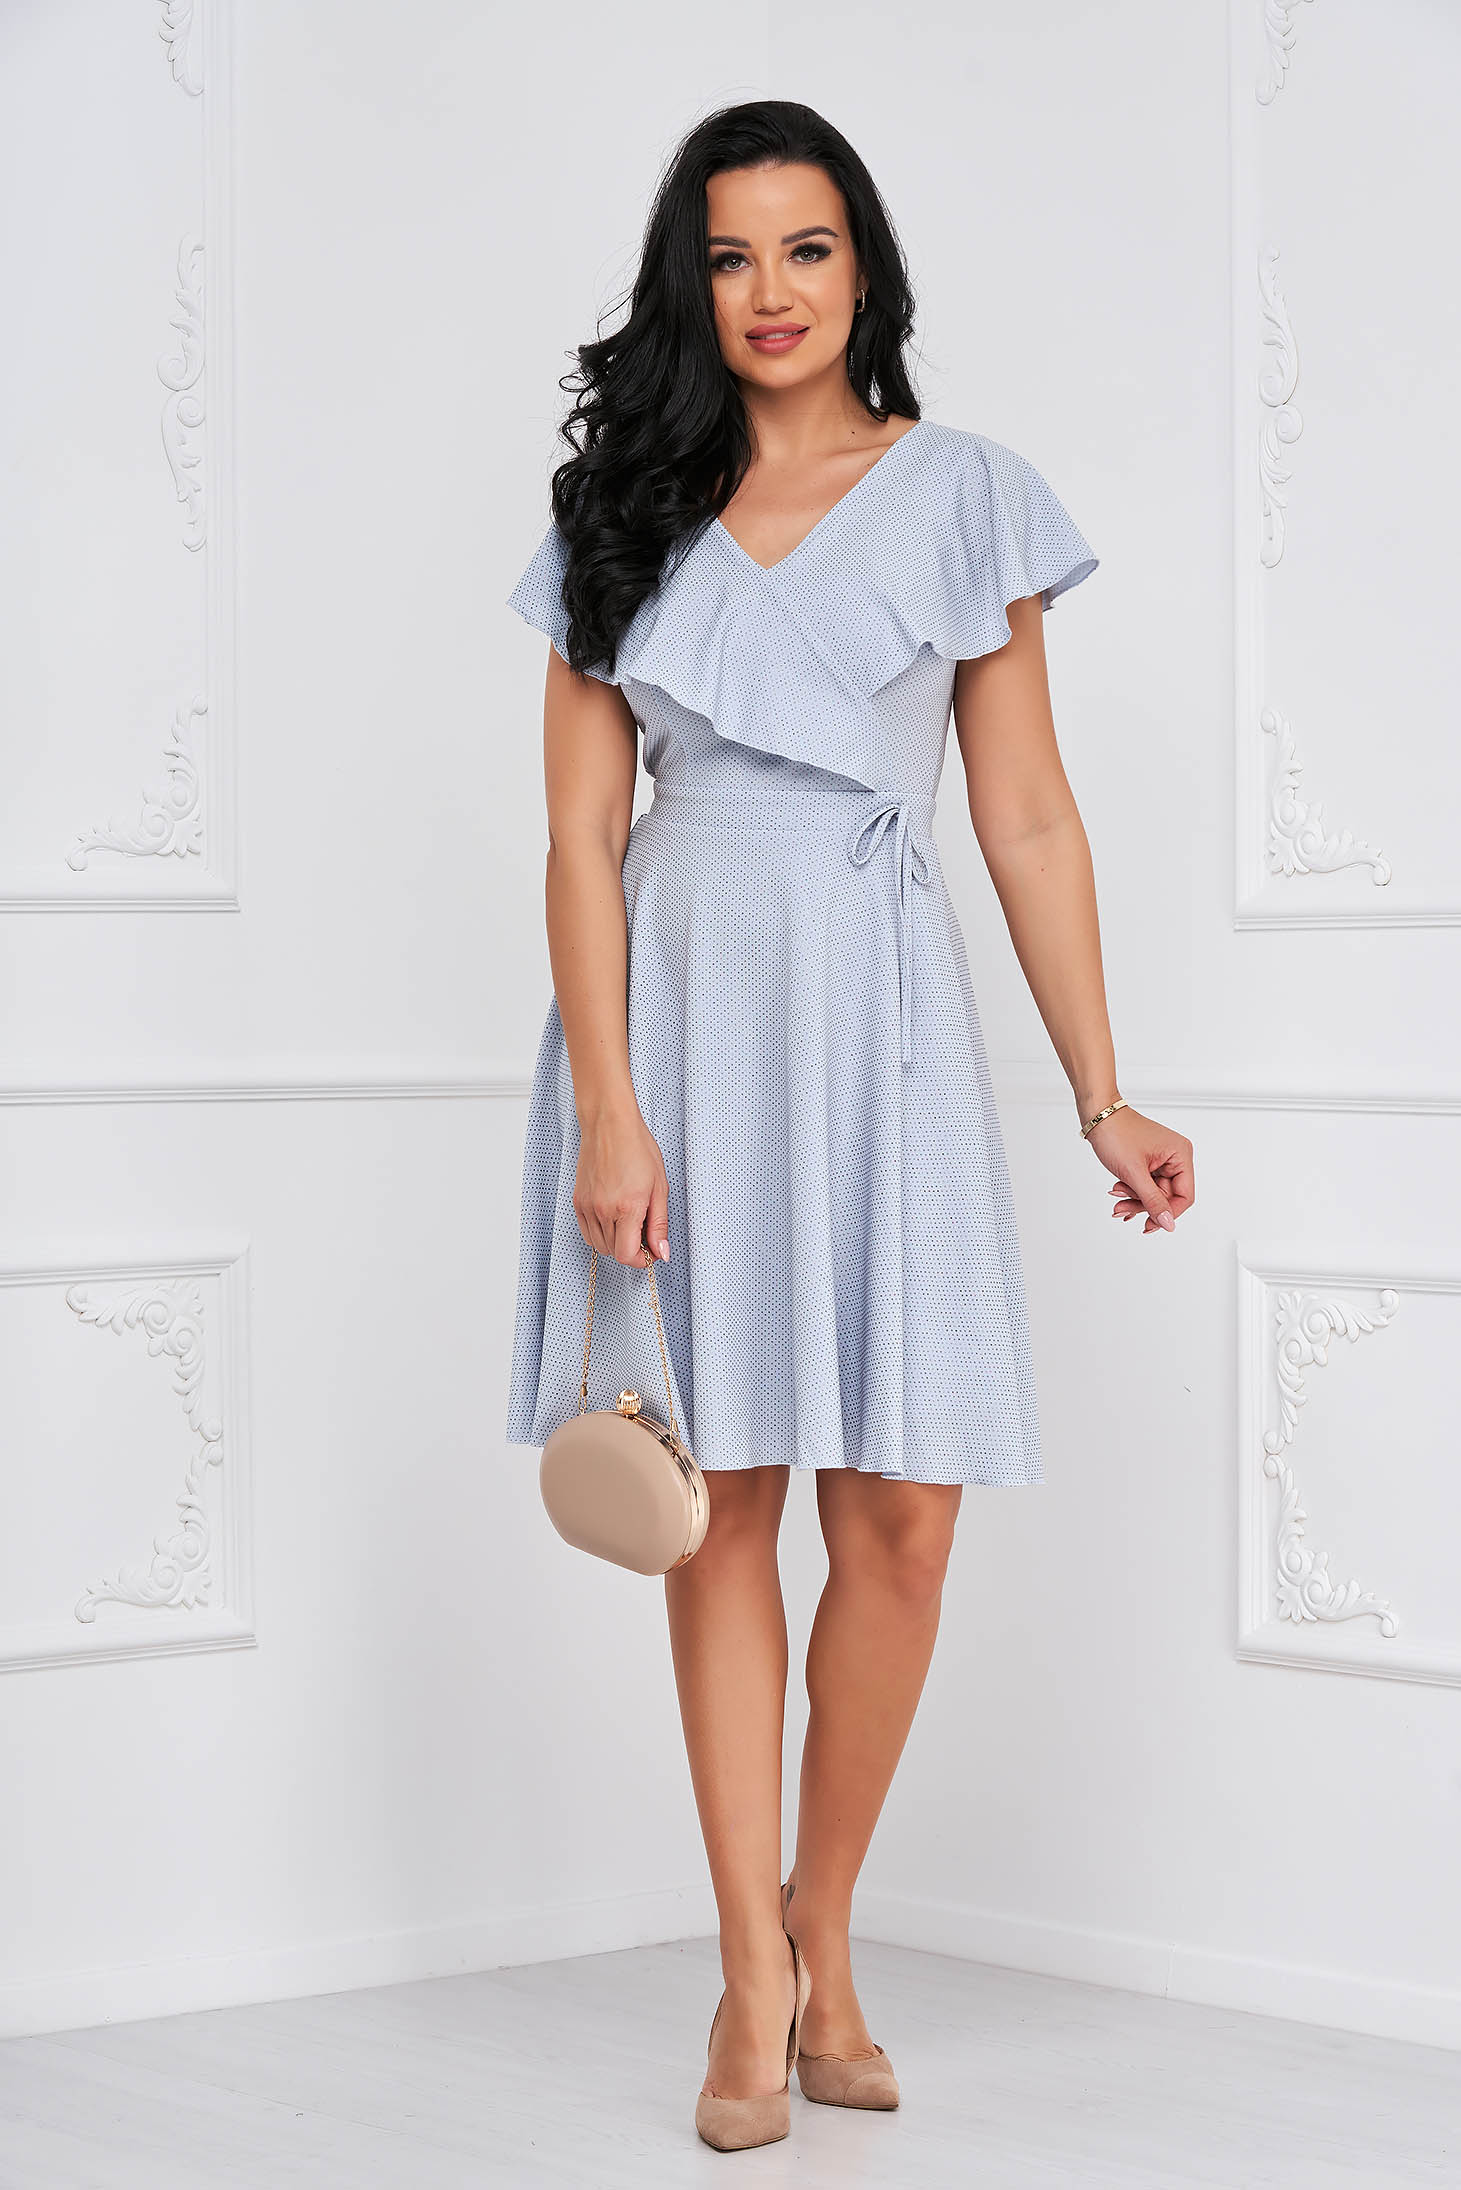 Light Blue Crepe Knee-Length A-Line Dress with Glitter Applications - StarShinerS 4 - StarShinerS.com